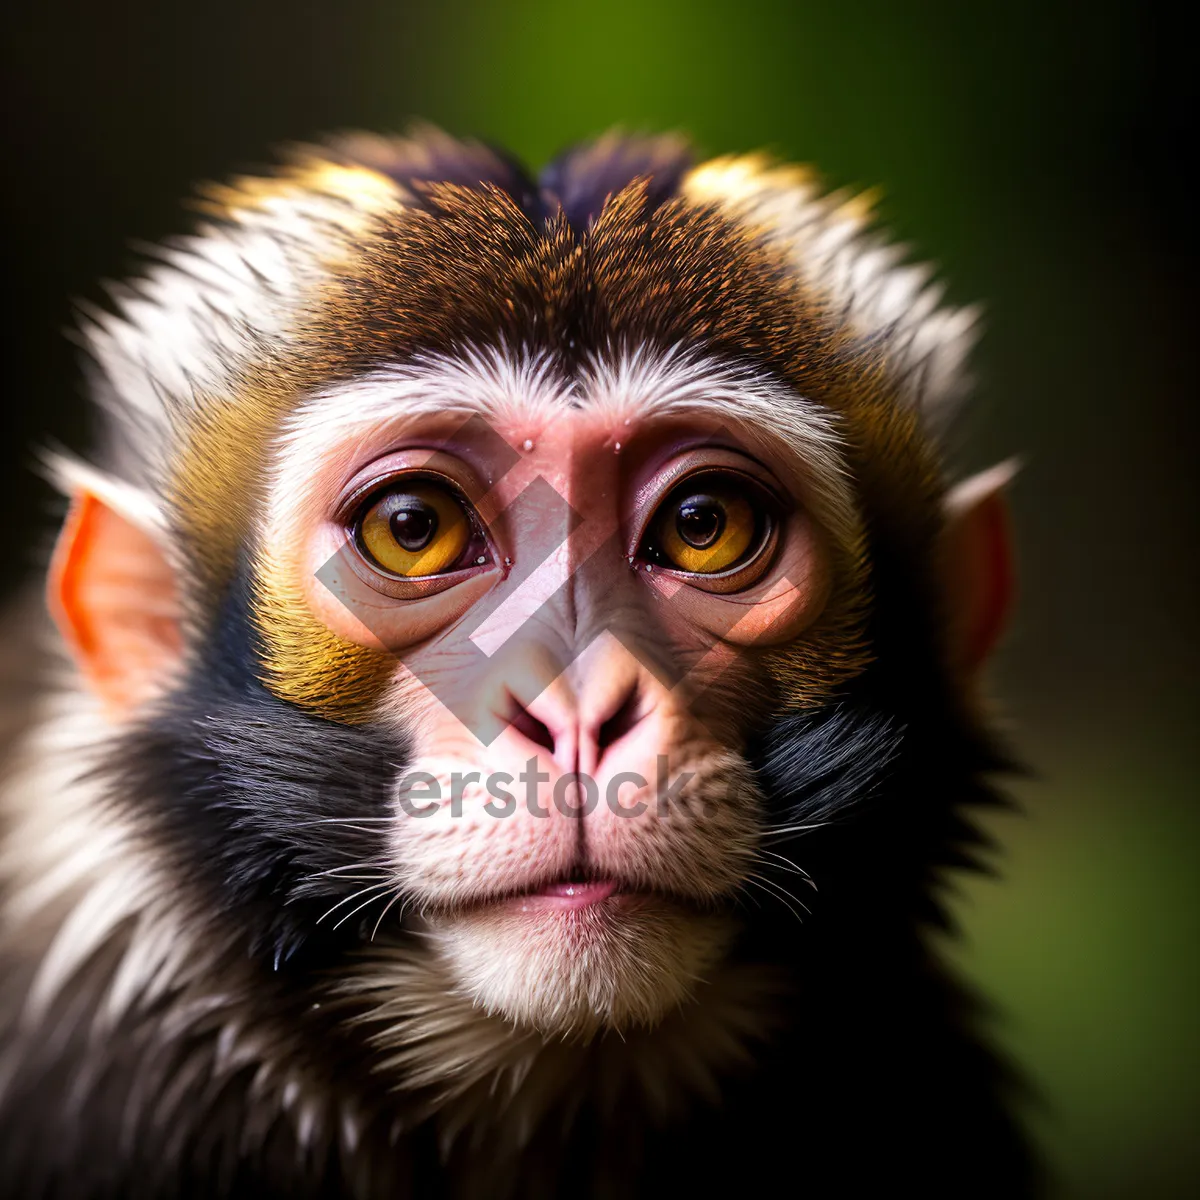 Picture of Adorable Baby Monkey with Furry Whiskers